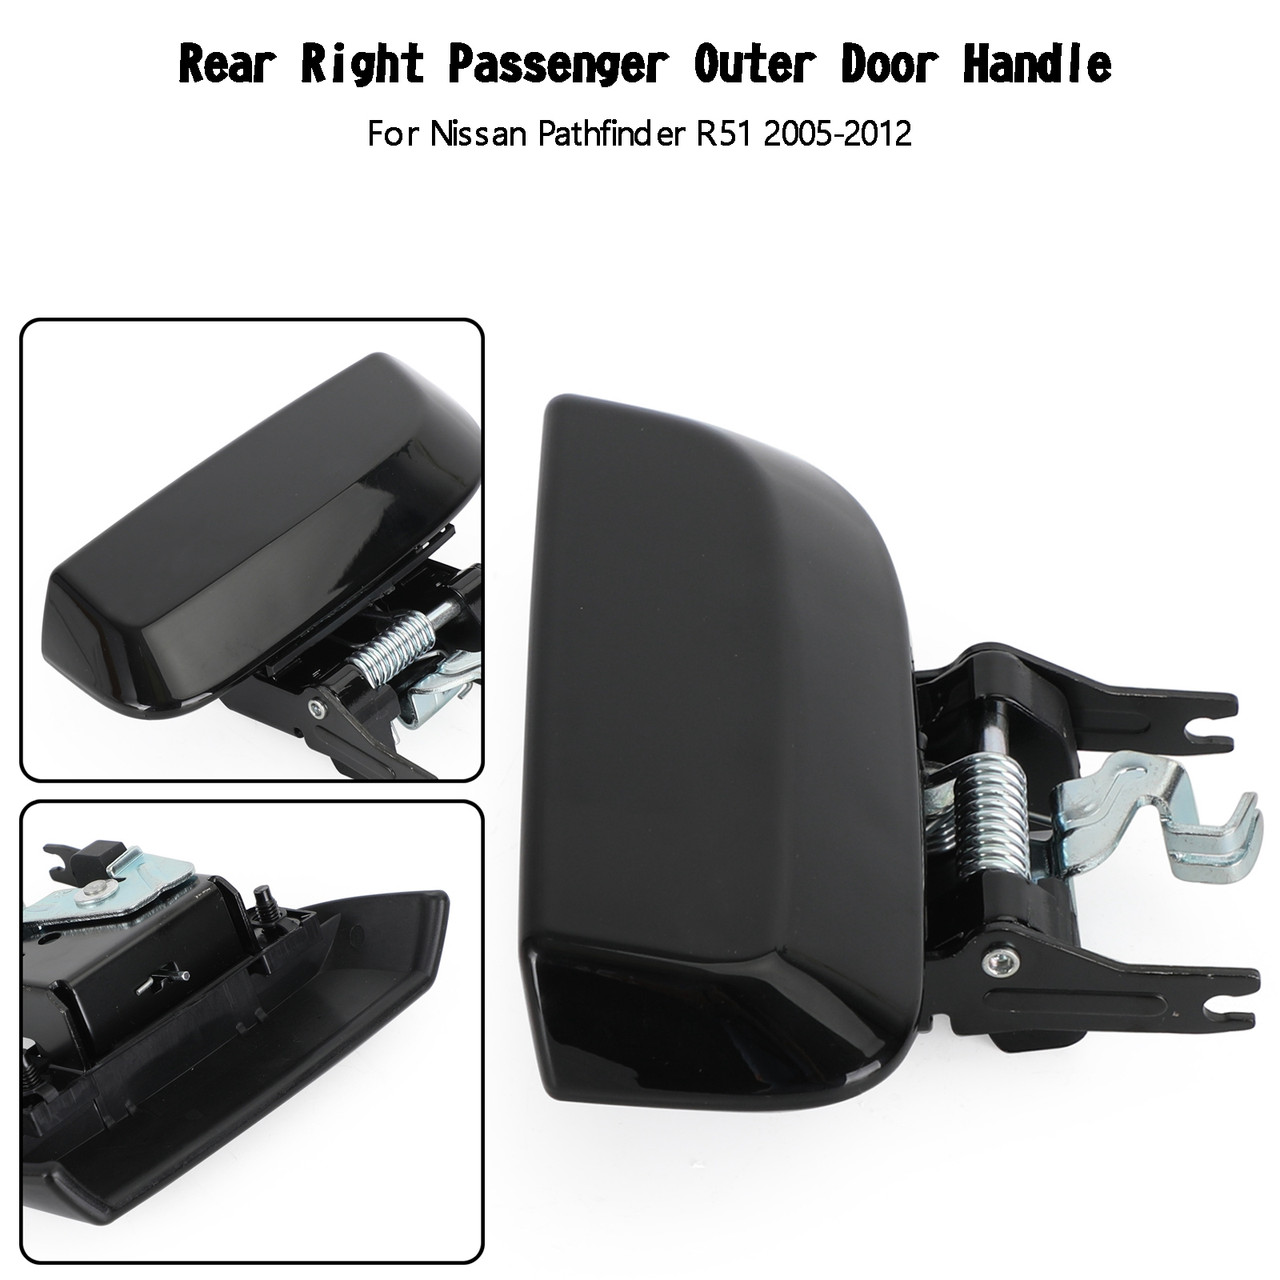 Rear Right Passenger Outer Door Handle For Nissan Pathfinder R51 2005-2012